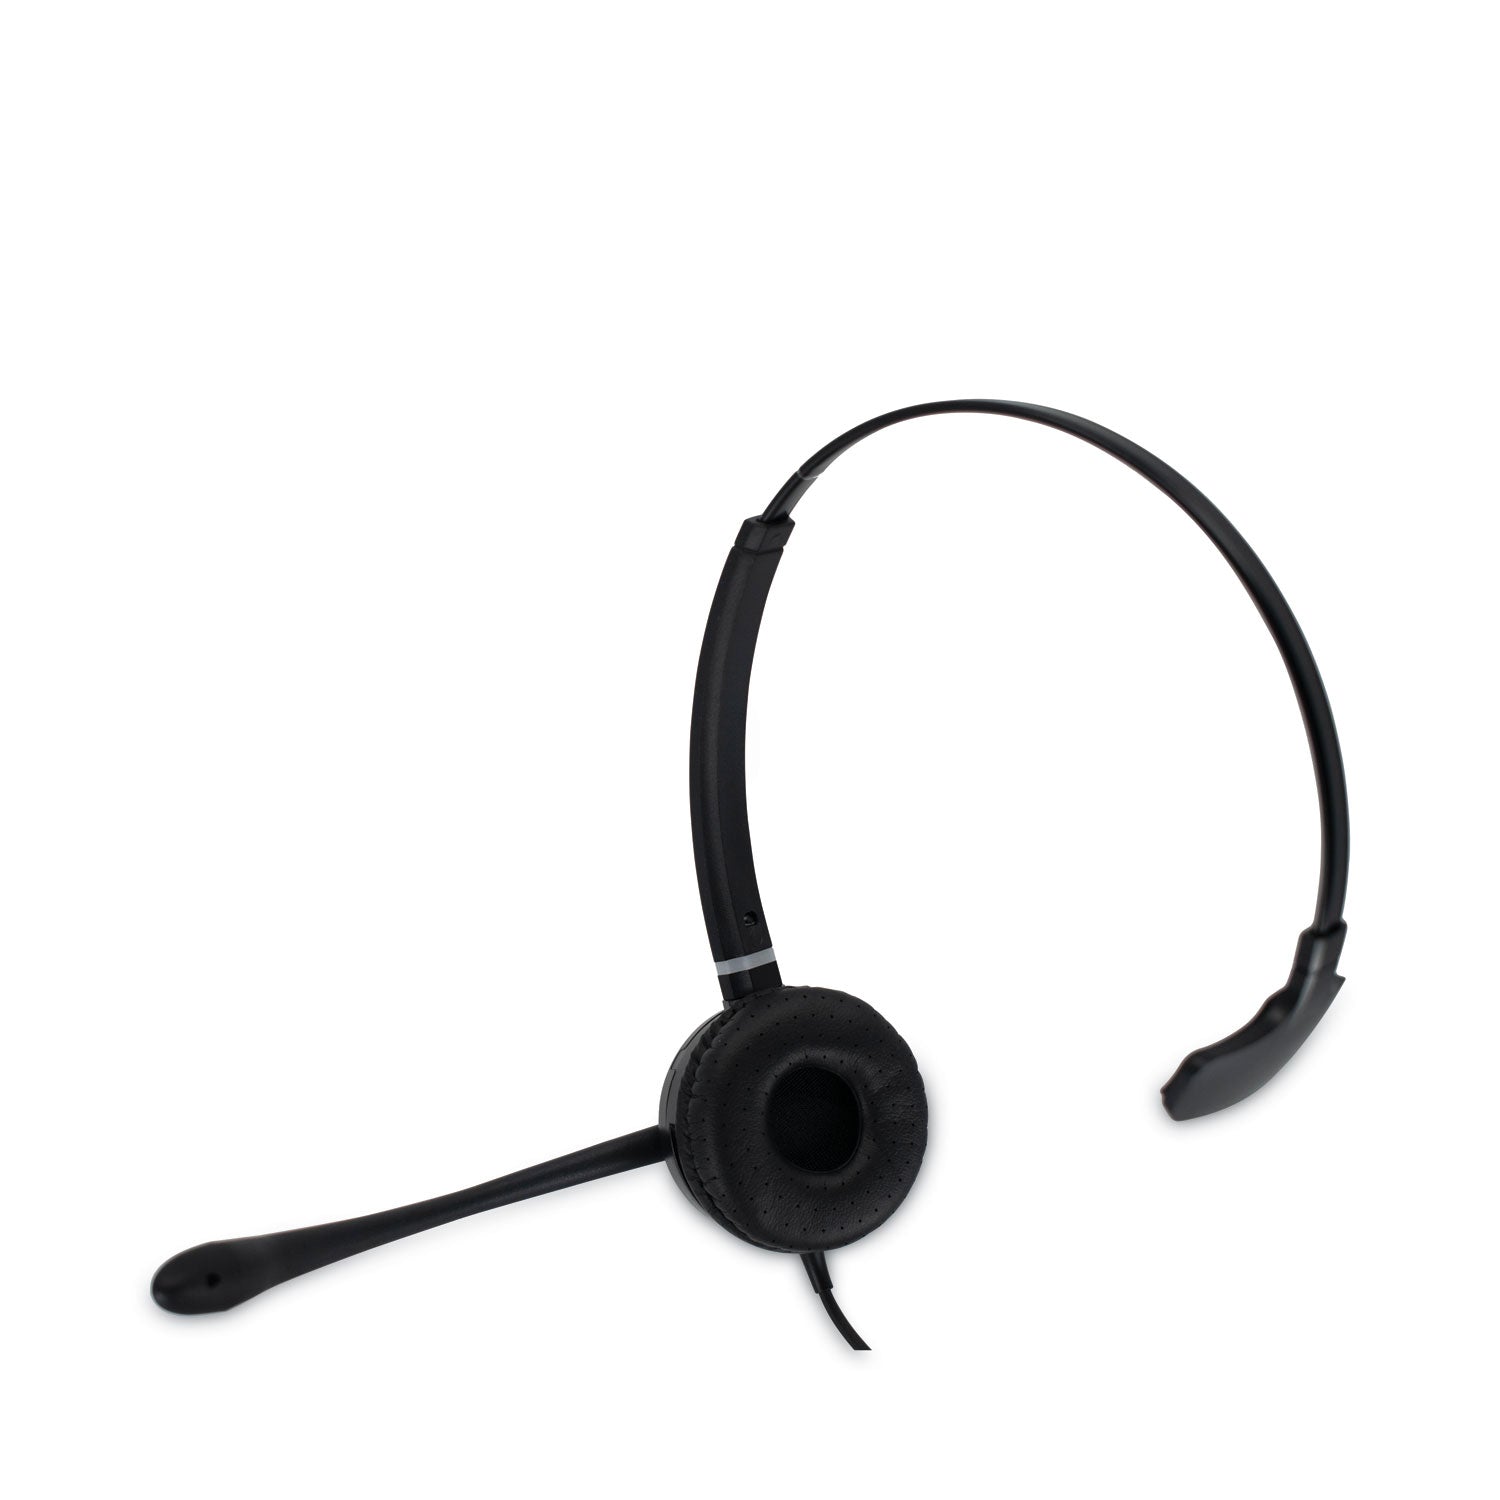 hs-wd-usb-1-monaural-over-the-head-headset-black_spthswdusb1 - 2